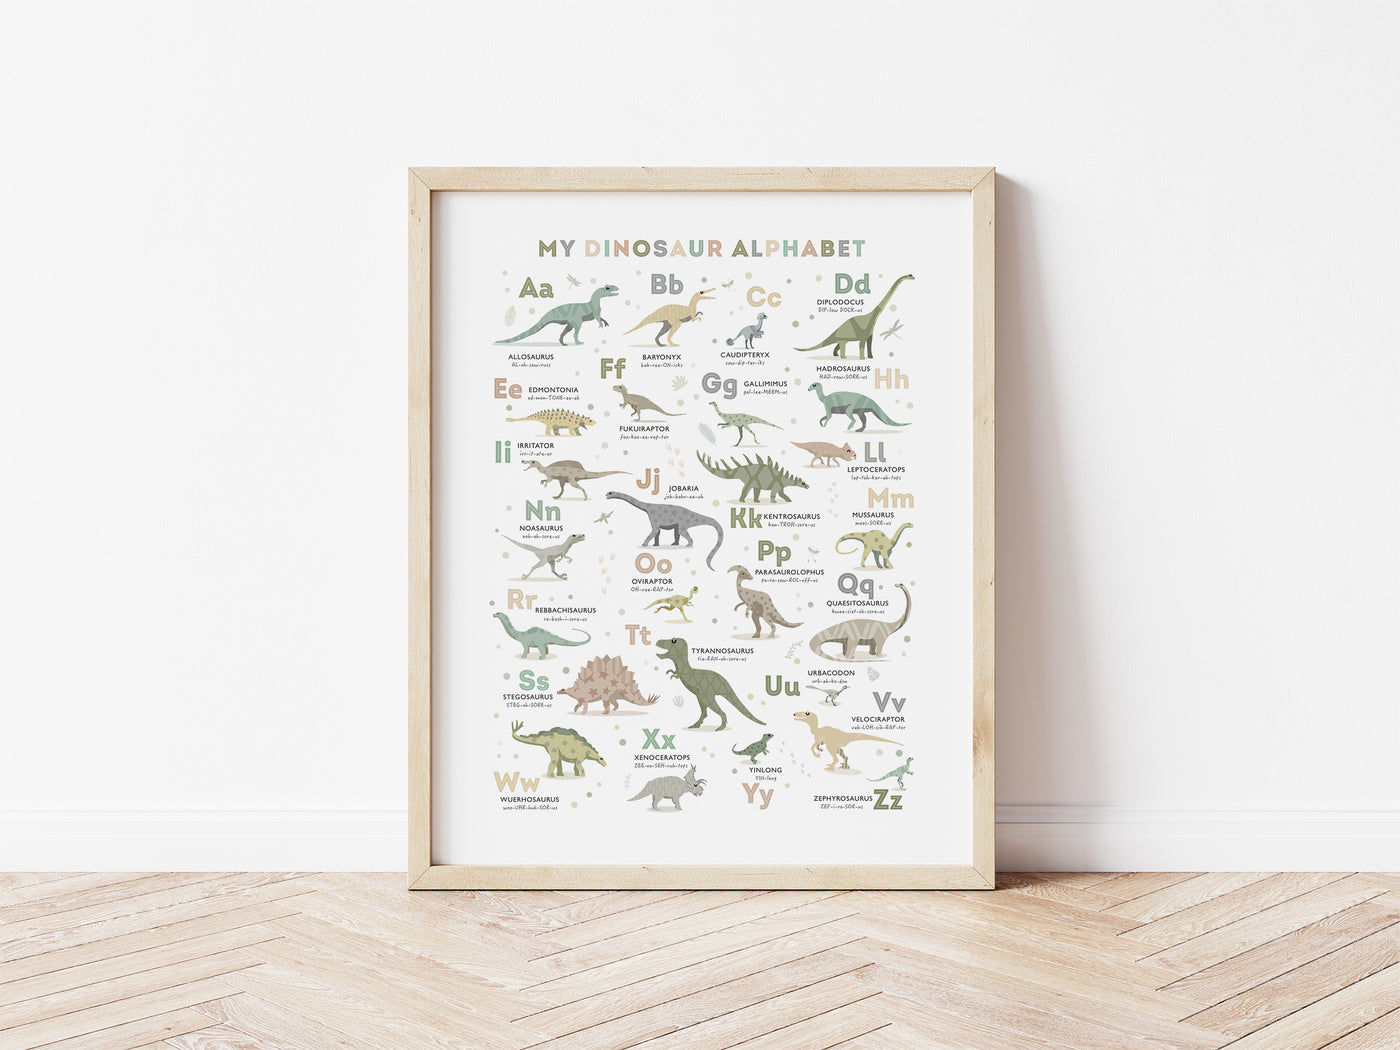 Dinosaur Alphabet Poster in Earth Tone Colours framed in oak, leaning against a white wall on a wooden floor